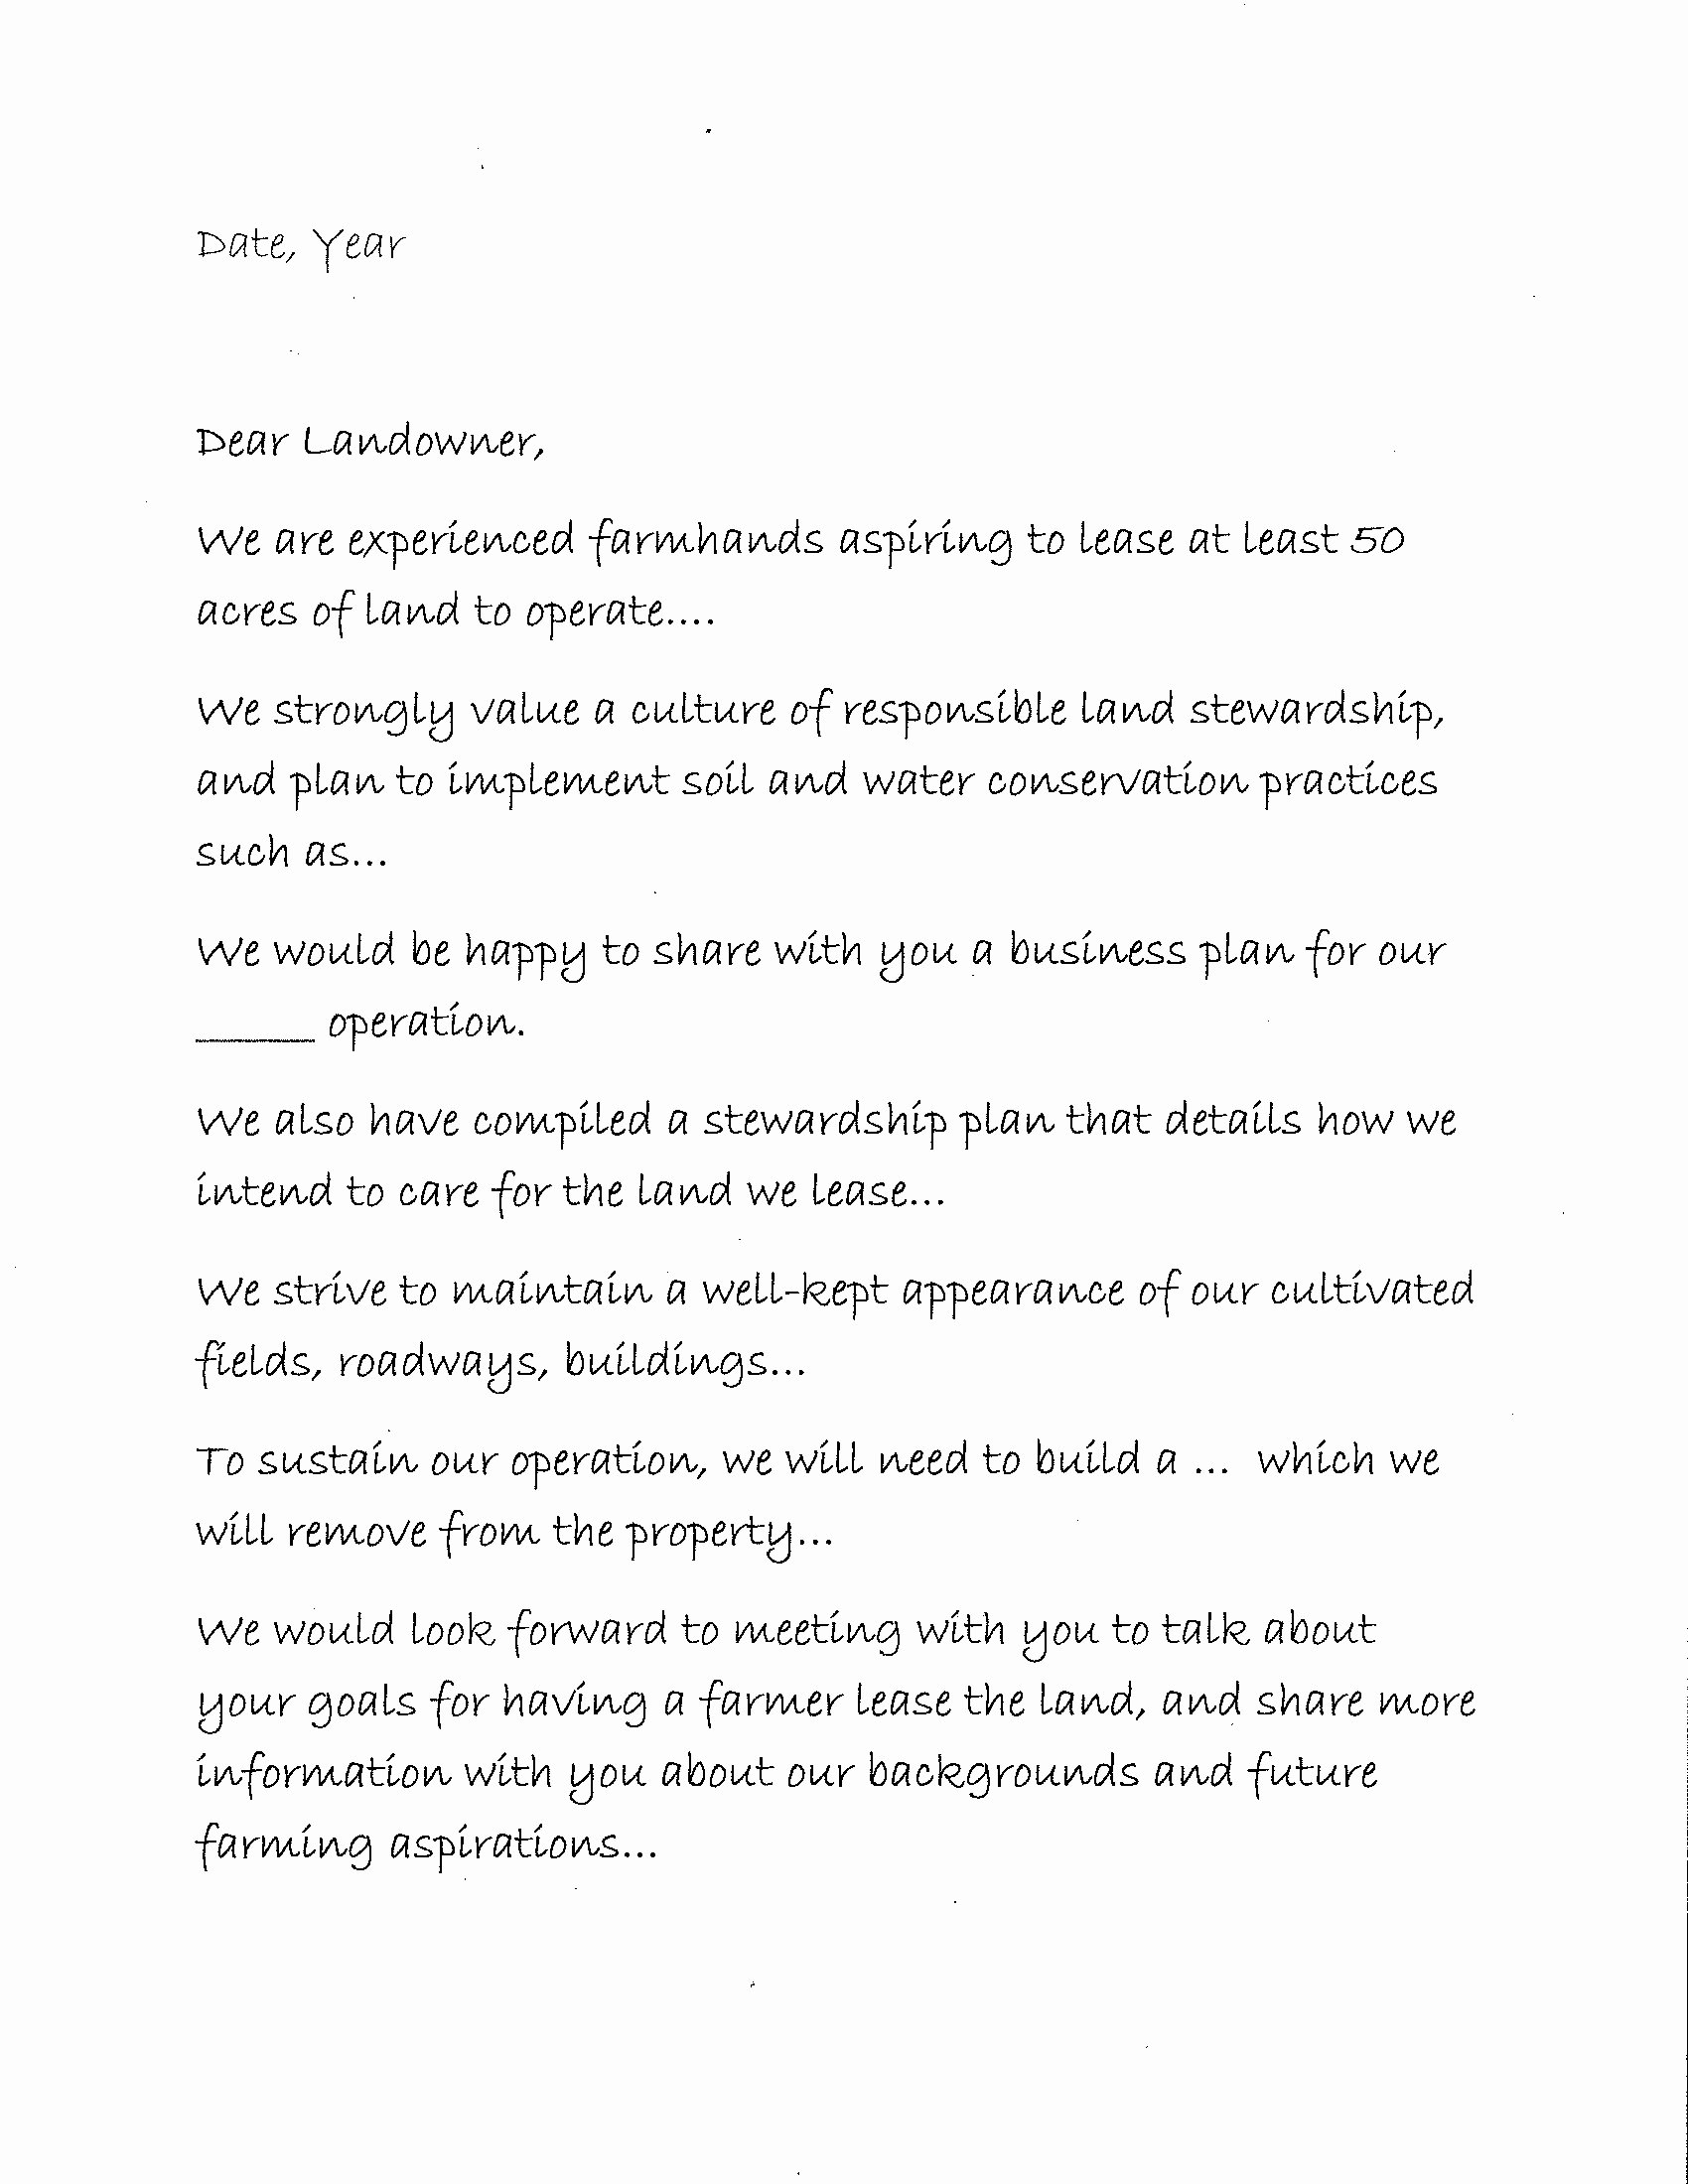 Sample Letter Of Intent to Lease Lovely Leasing From Non Farming Landowners Part I